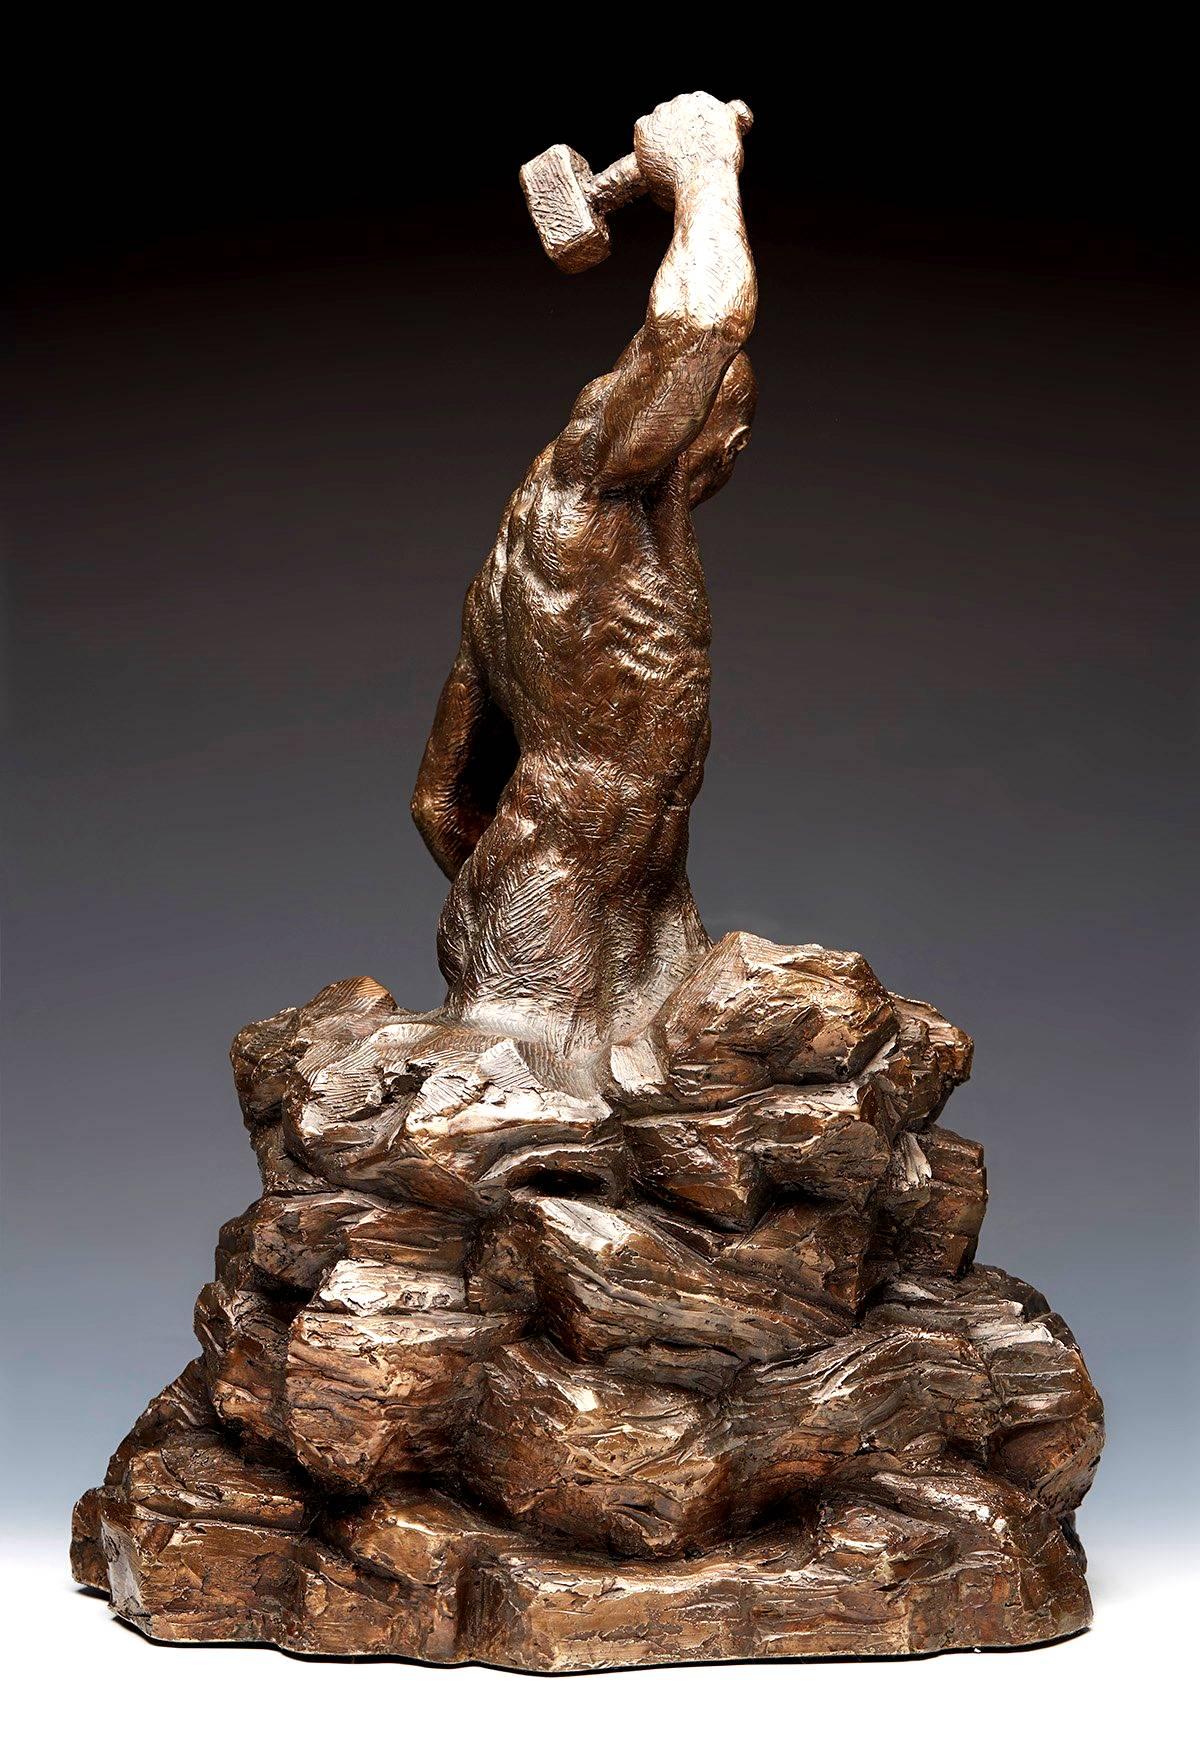 Ian Edwards - Born	of Fire - Original Signed Bronze Sculpure
Dimensions: 30 x 32 x 32 cm 
Edition of 12	

Edwards’ practice expresses the power and determination of human endeavour. He
draws inspiration from natural forces, with his powerful